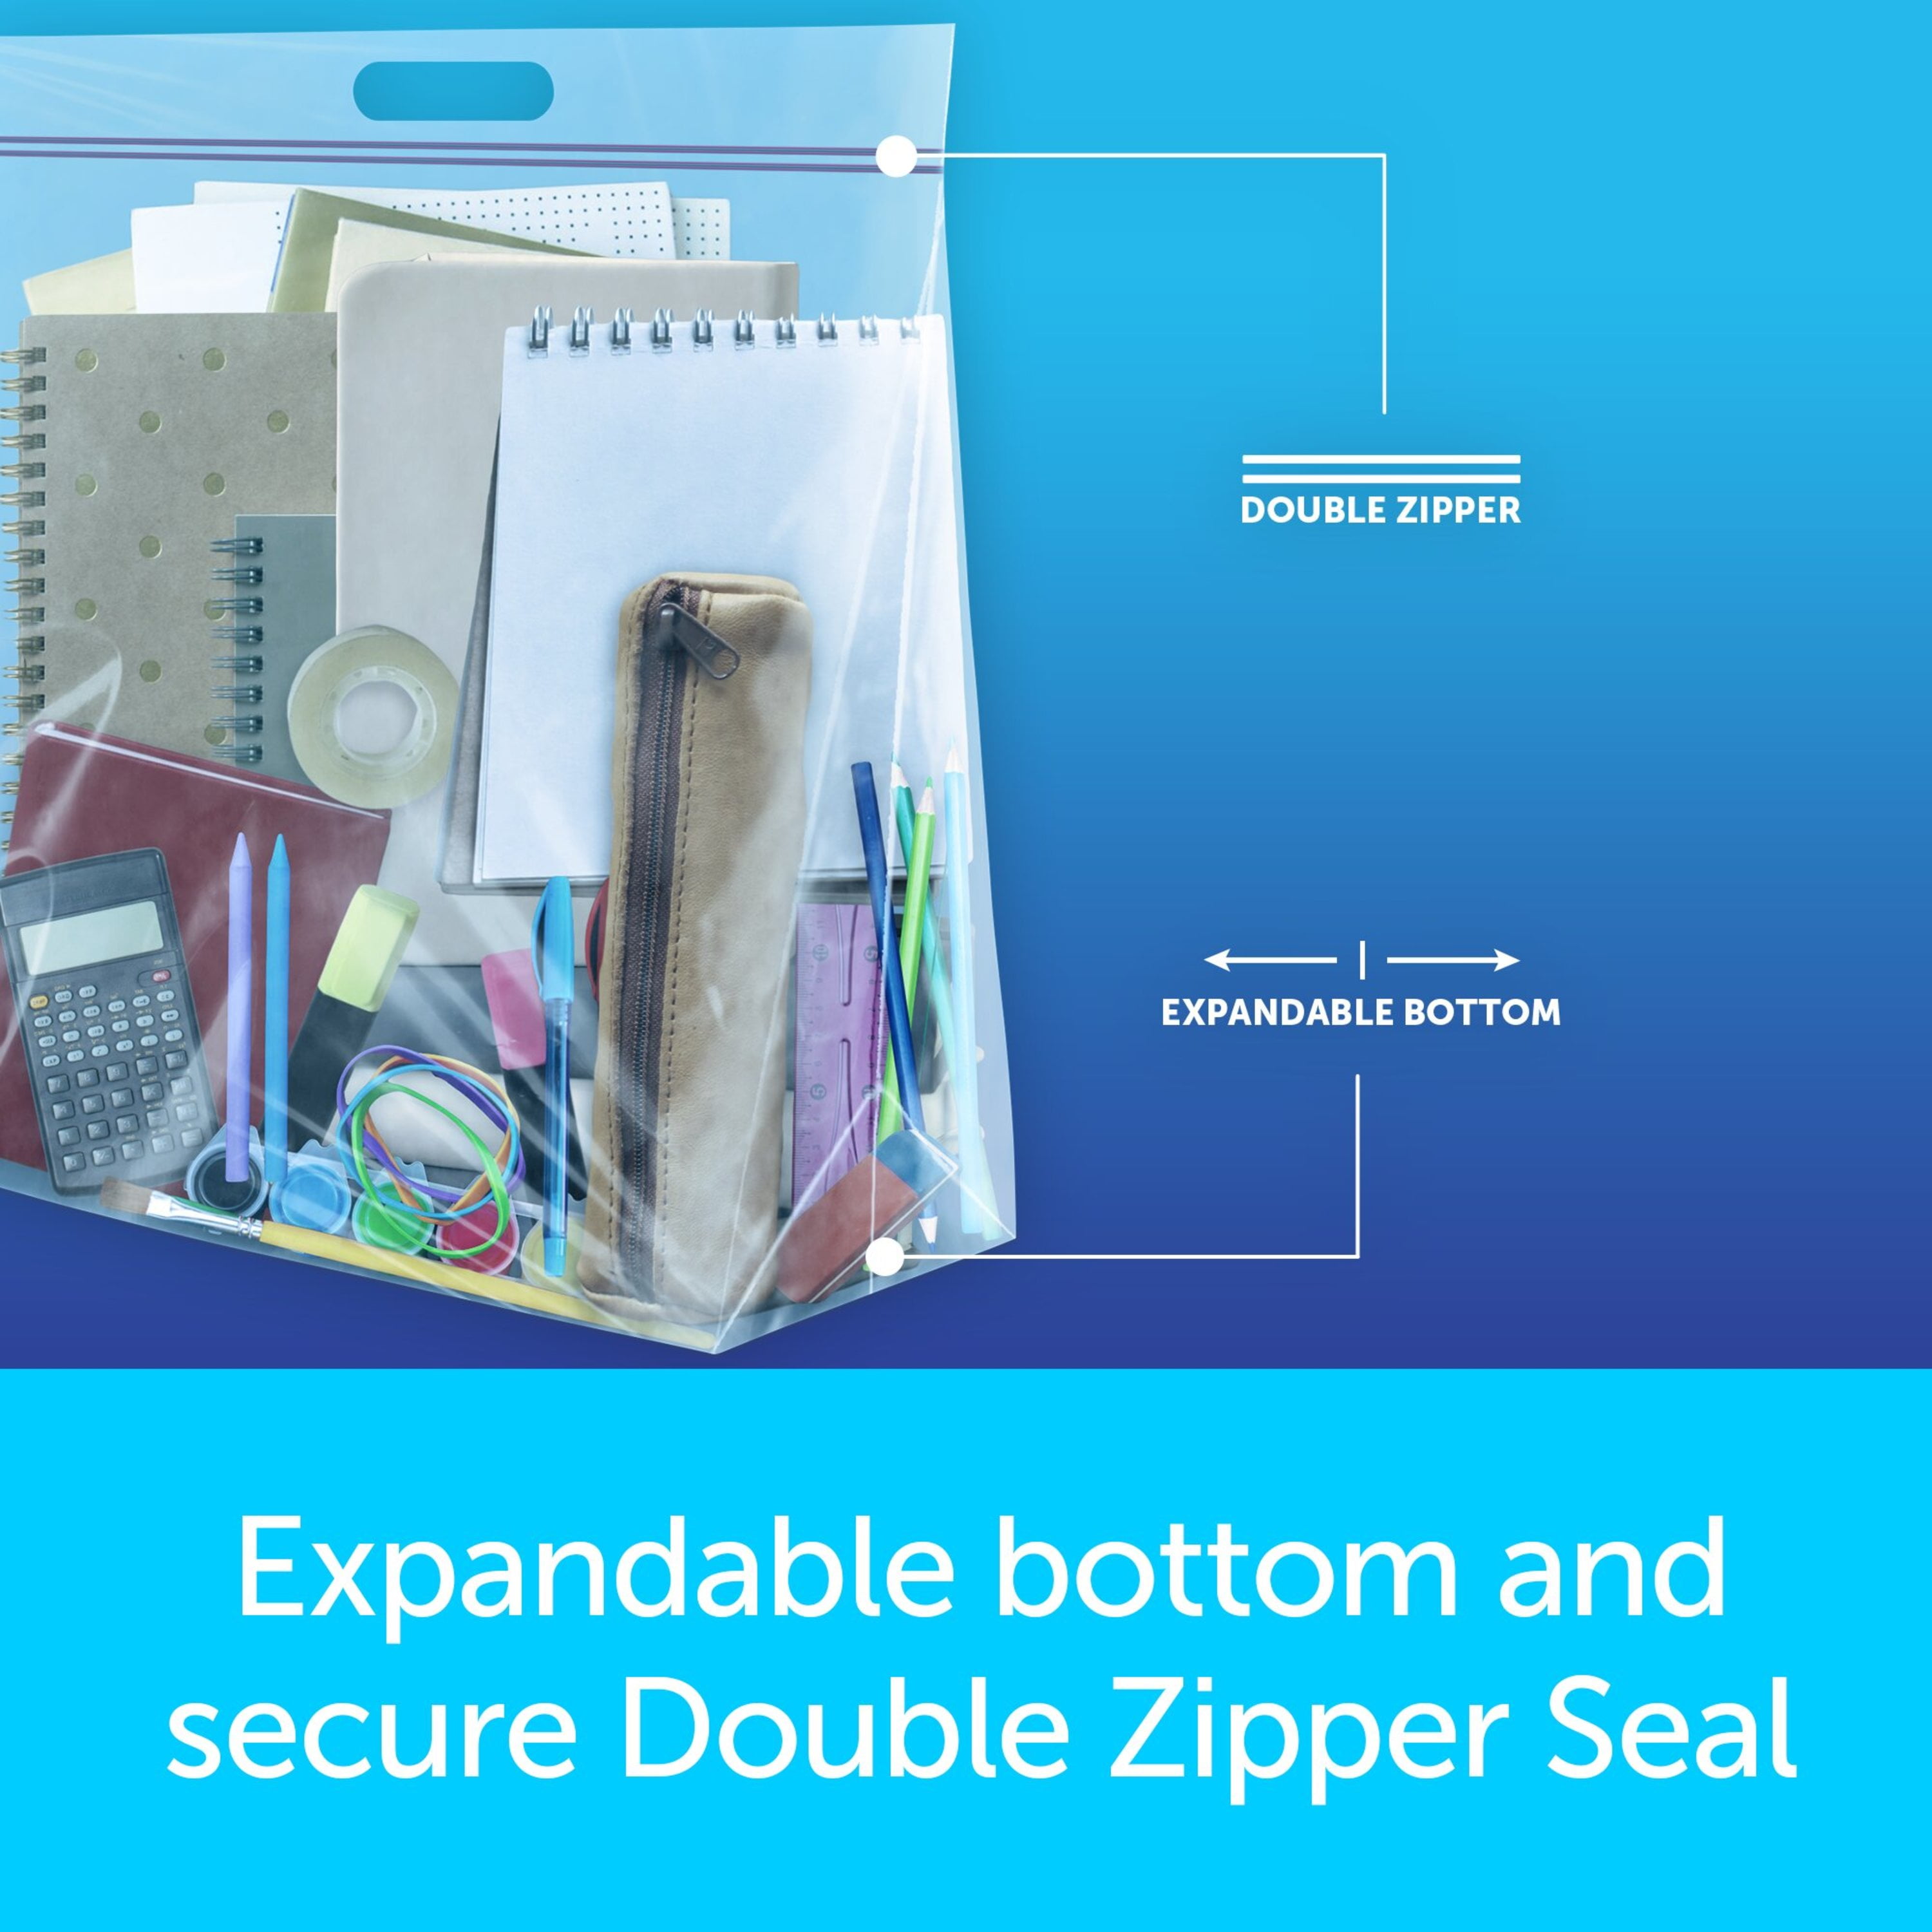 Ziploc® Big Bags, Jumbo, Secure Double Zipper, 3 ct, Expandable Bottom,  Heavy-Duty Plastic, Built-In Handles, Flexible Shape to Fit Where Storage  Boxes Can't 